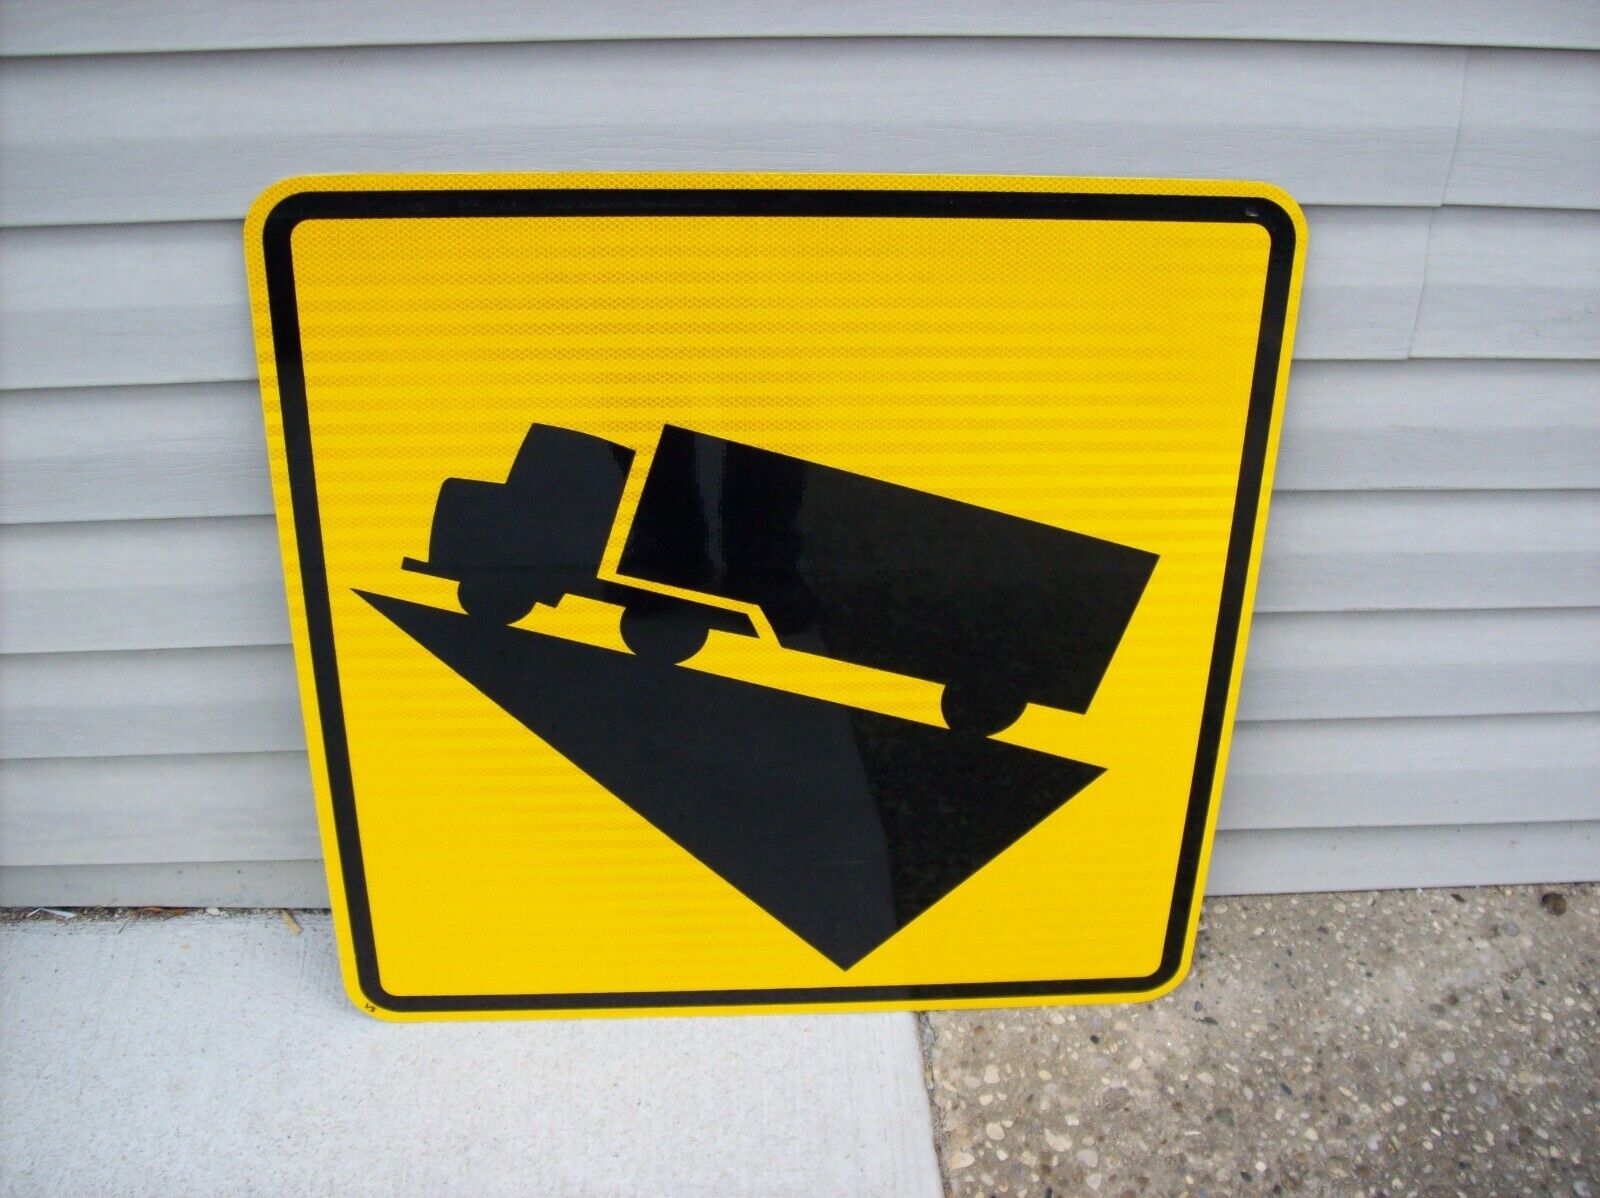 Genuine Authentic NEW Street Sign - Hill Symbol (yellow & black)